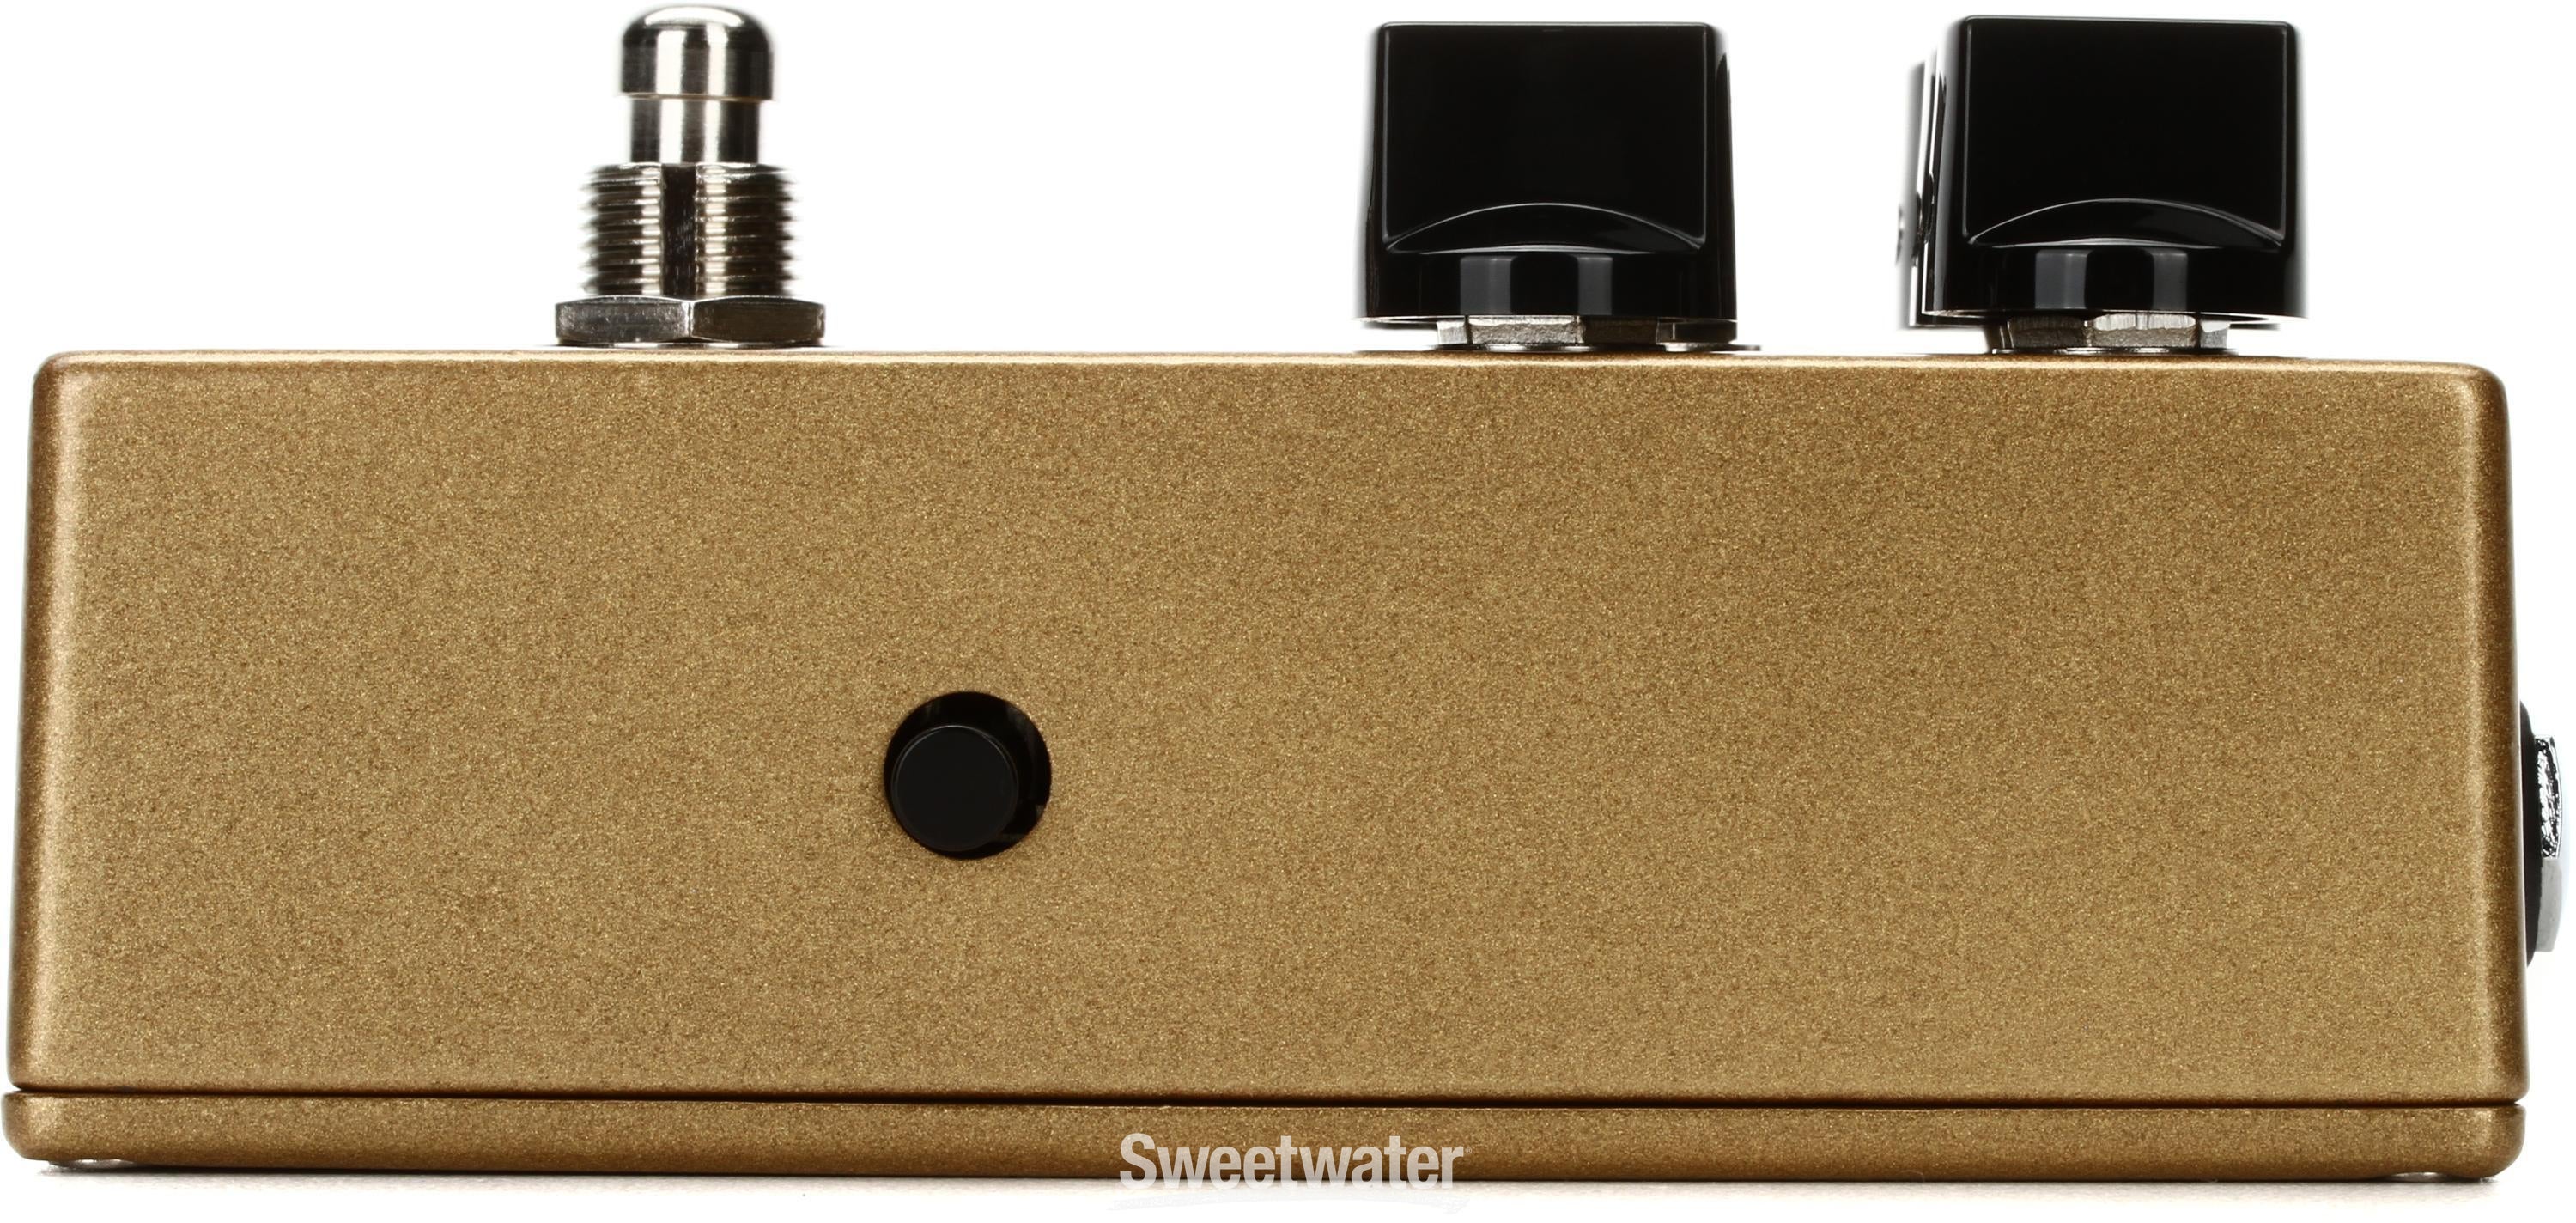 Wampler Tumnus Deluxe Transparent Overdrive Pedal | Sweetwater